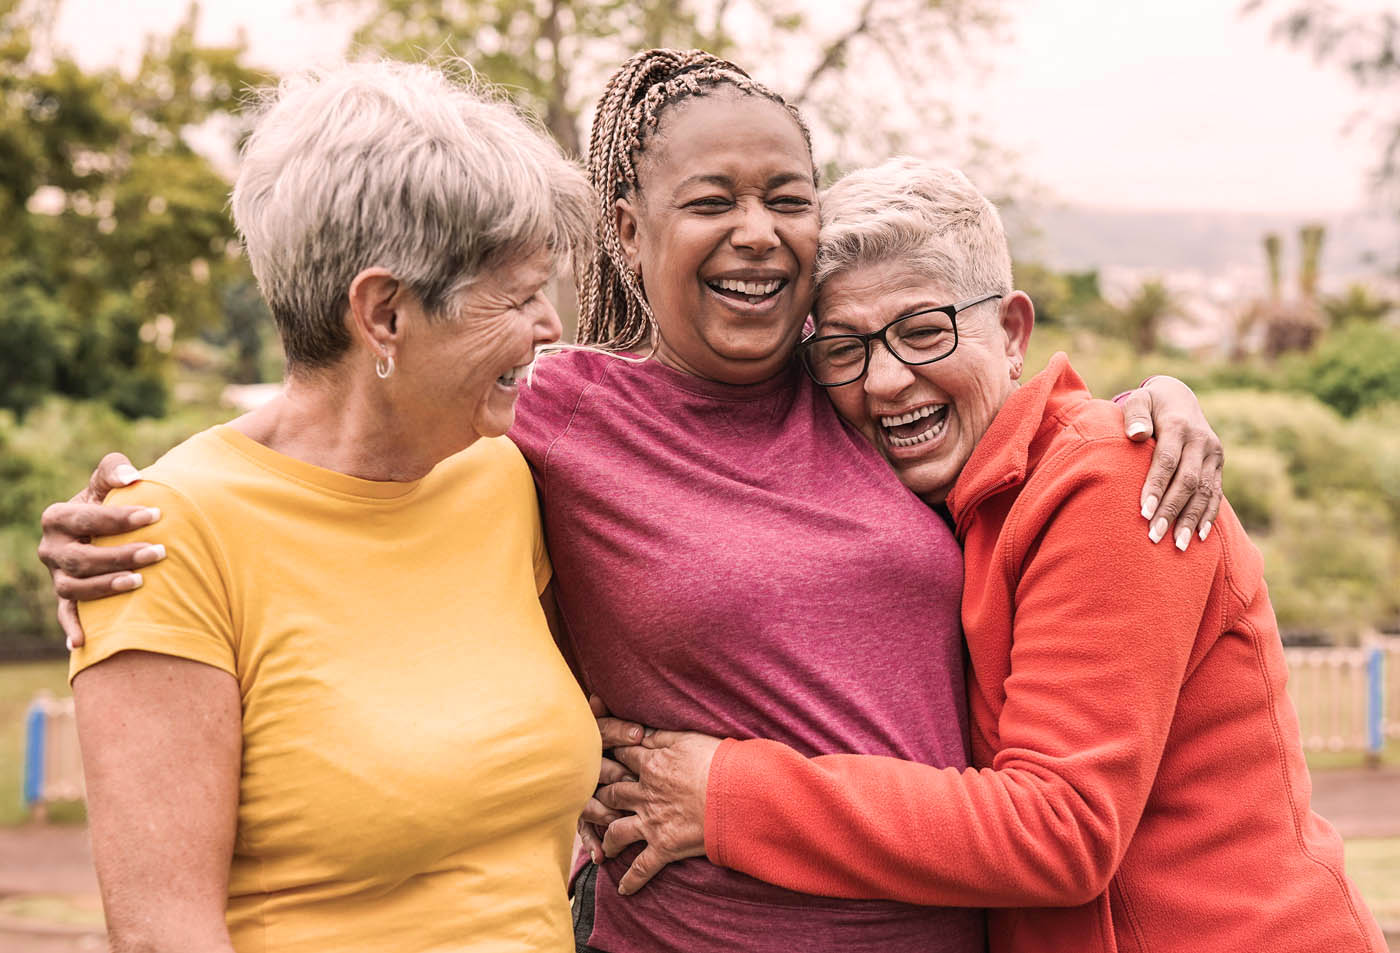 A group of elderly women laughing and hugging each other - discover Littleton multiple sclerosis pain treatment today.